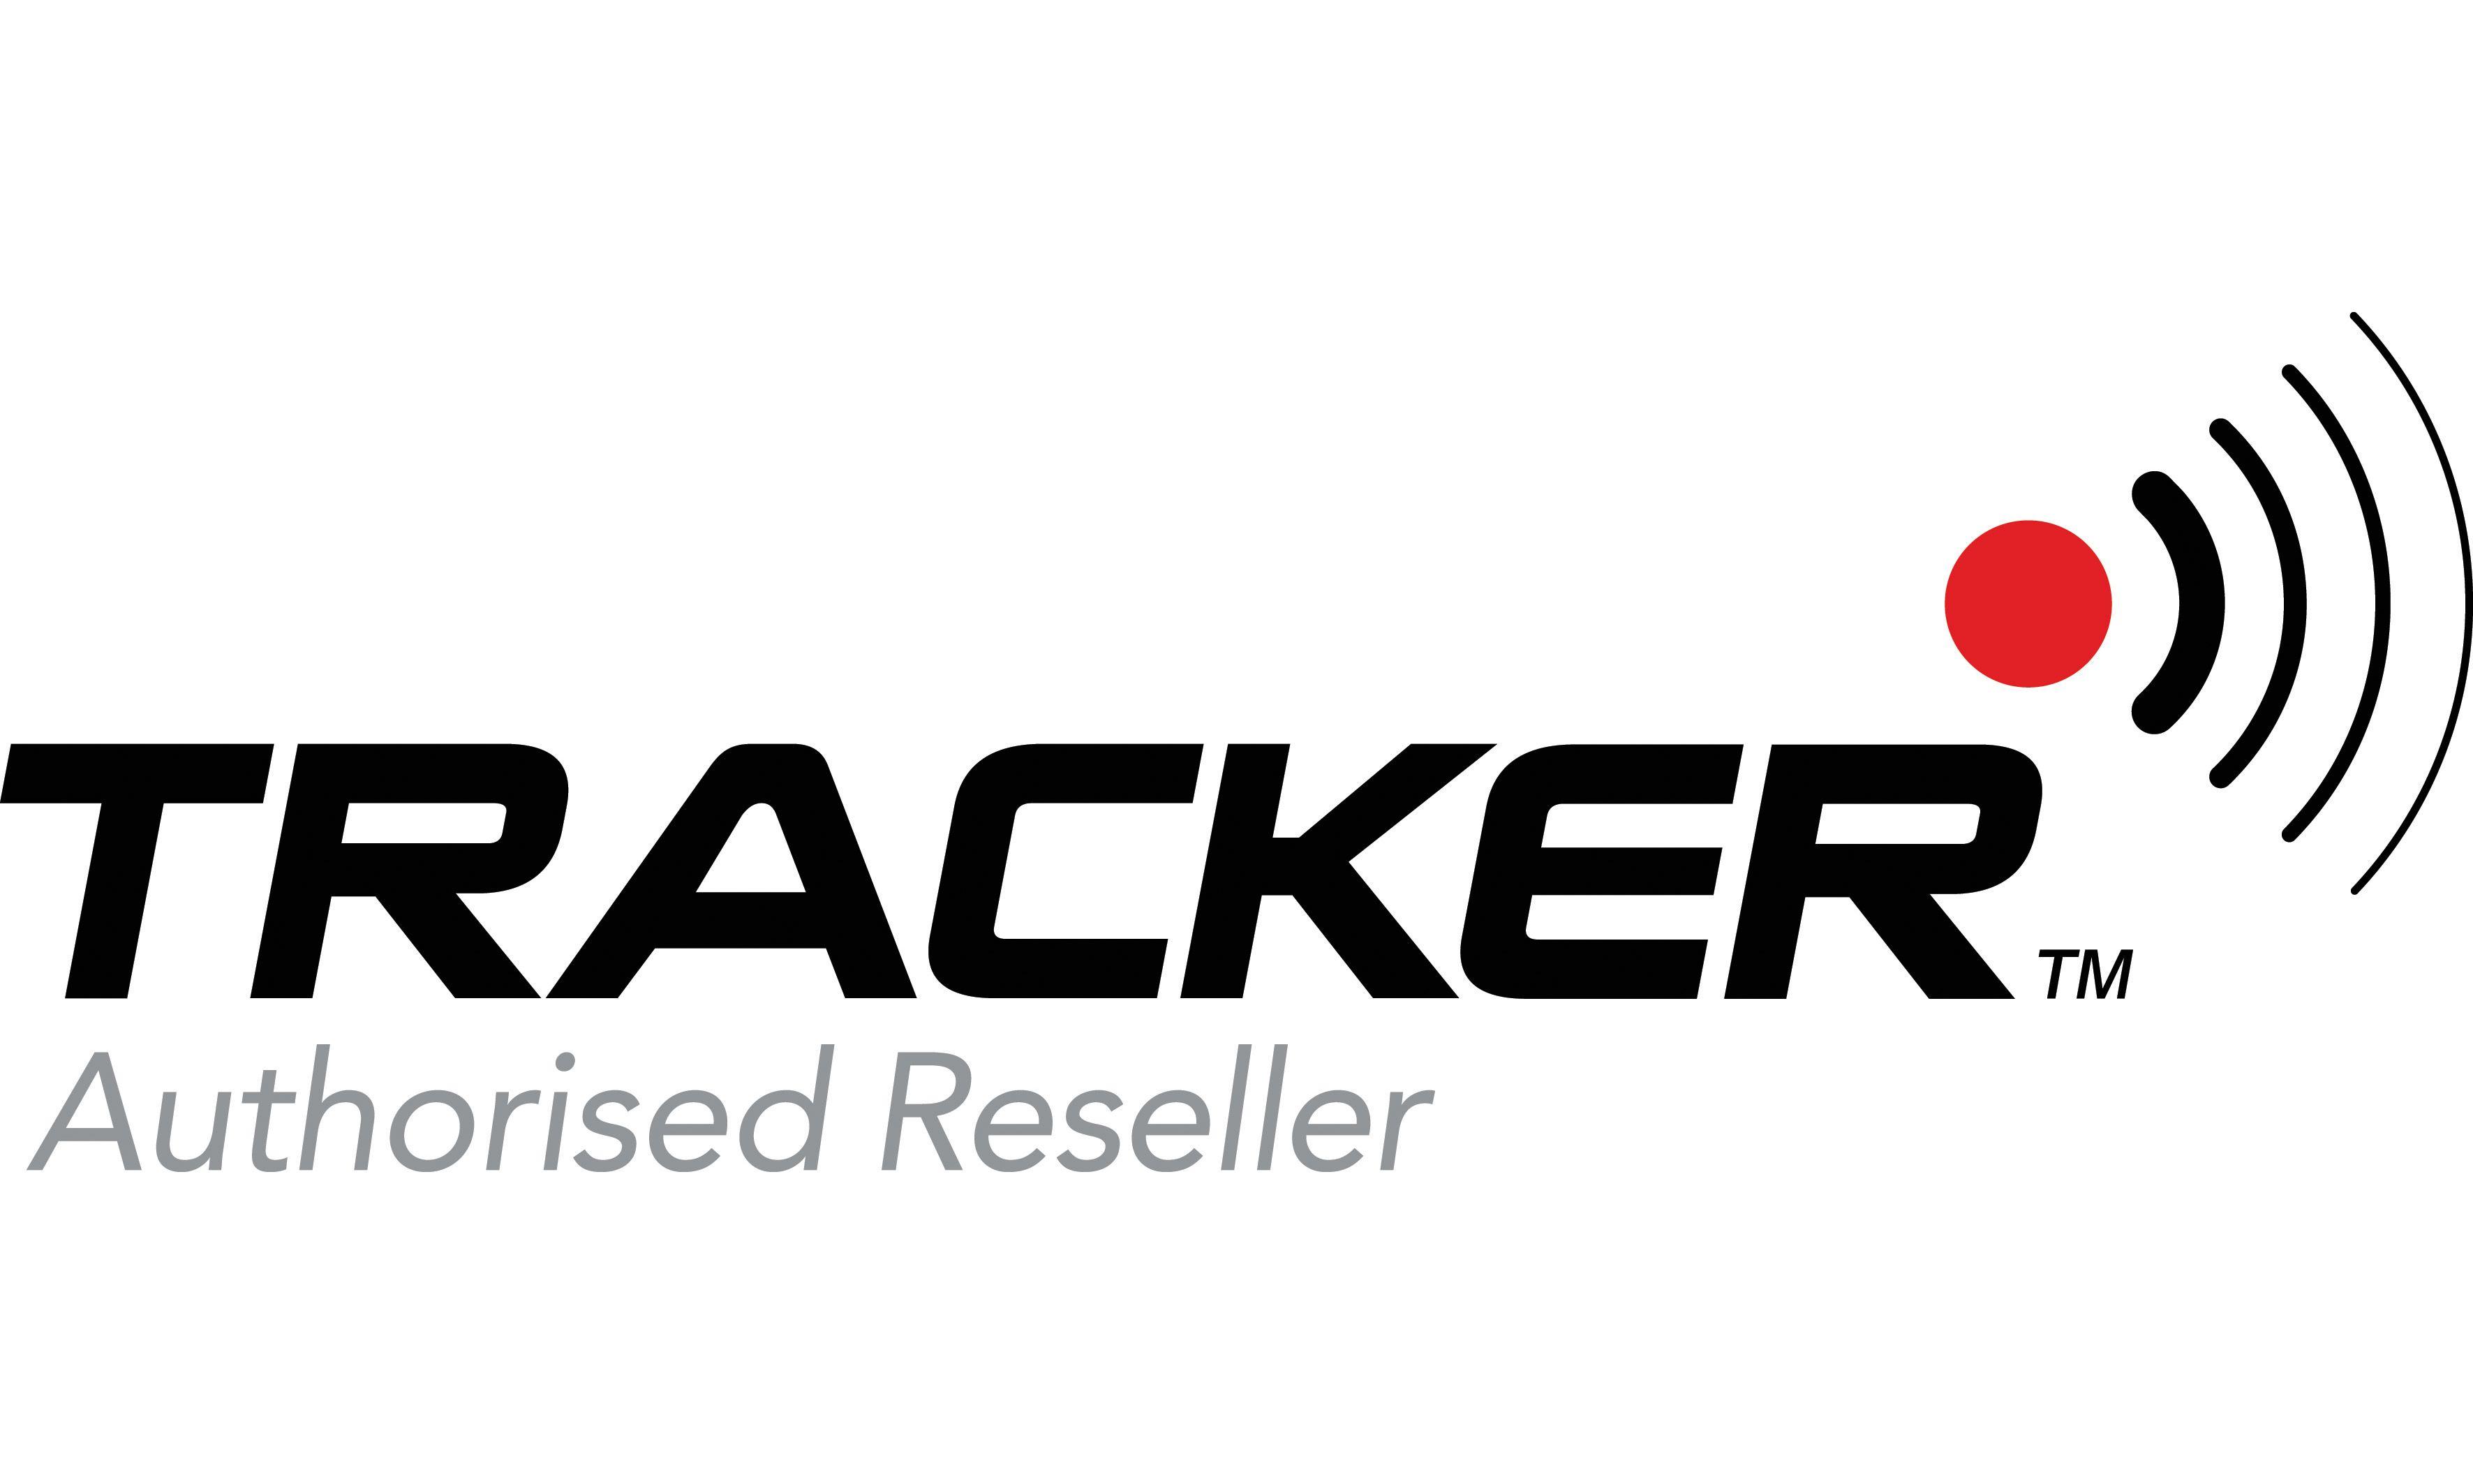 Tracker Logo - TRACKER-Authorised-Reseller-Logo-HR-Classic-and-sports-finance ...